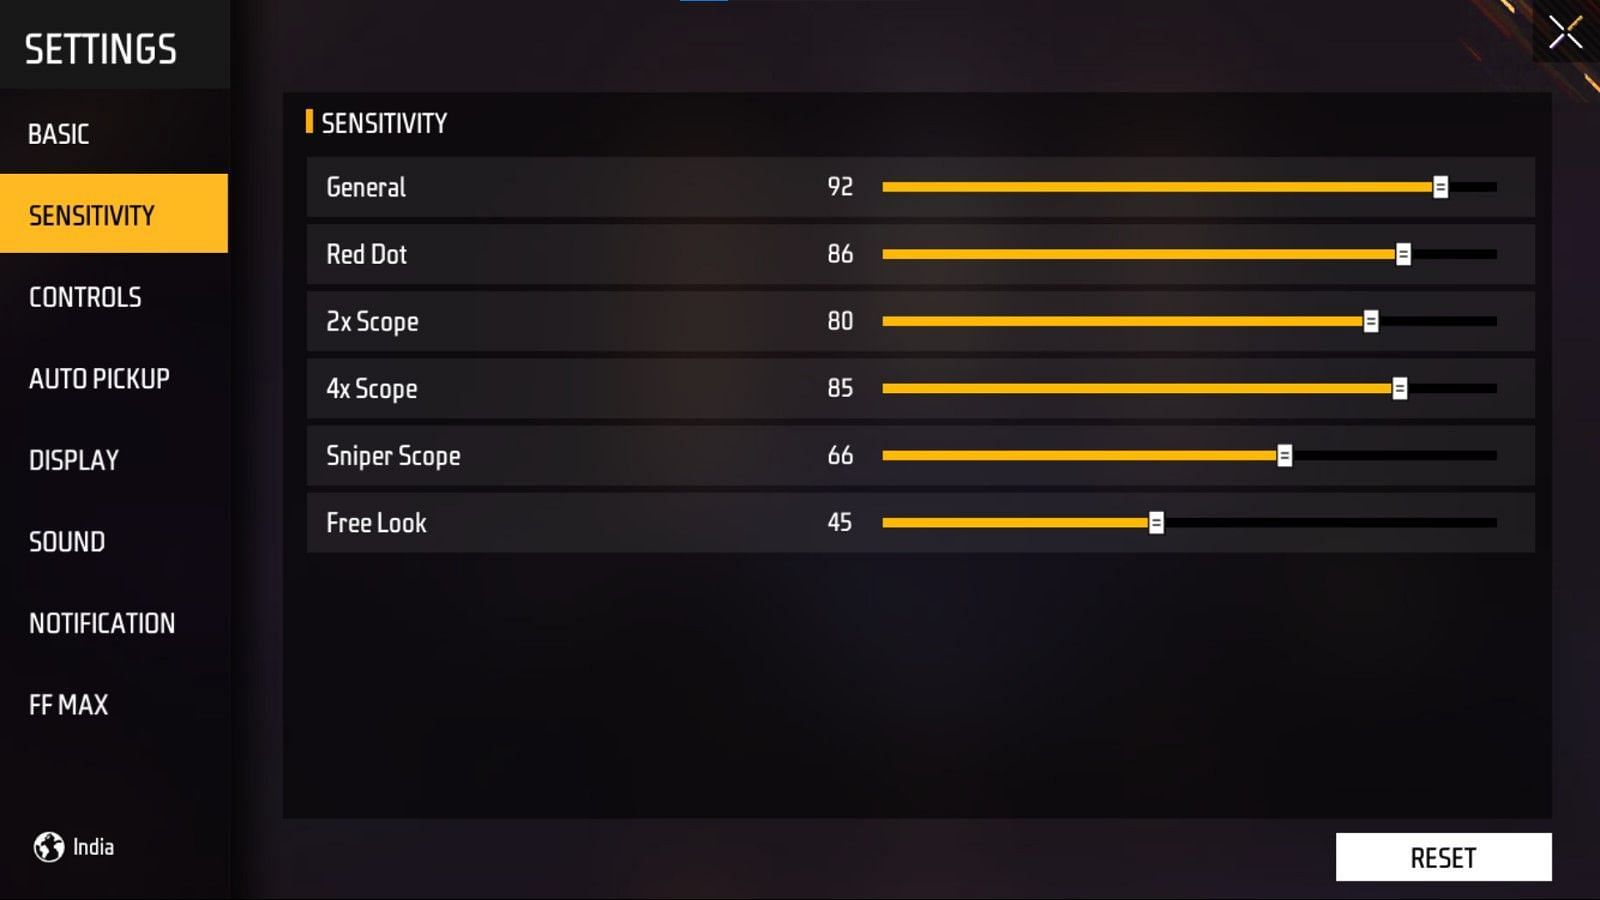 Sensitivity settings are more effective with average level devices (Image via Garena)